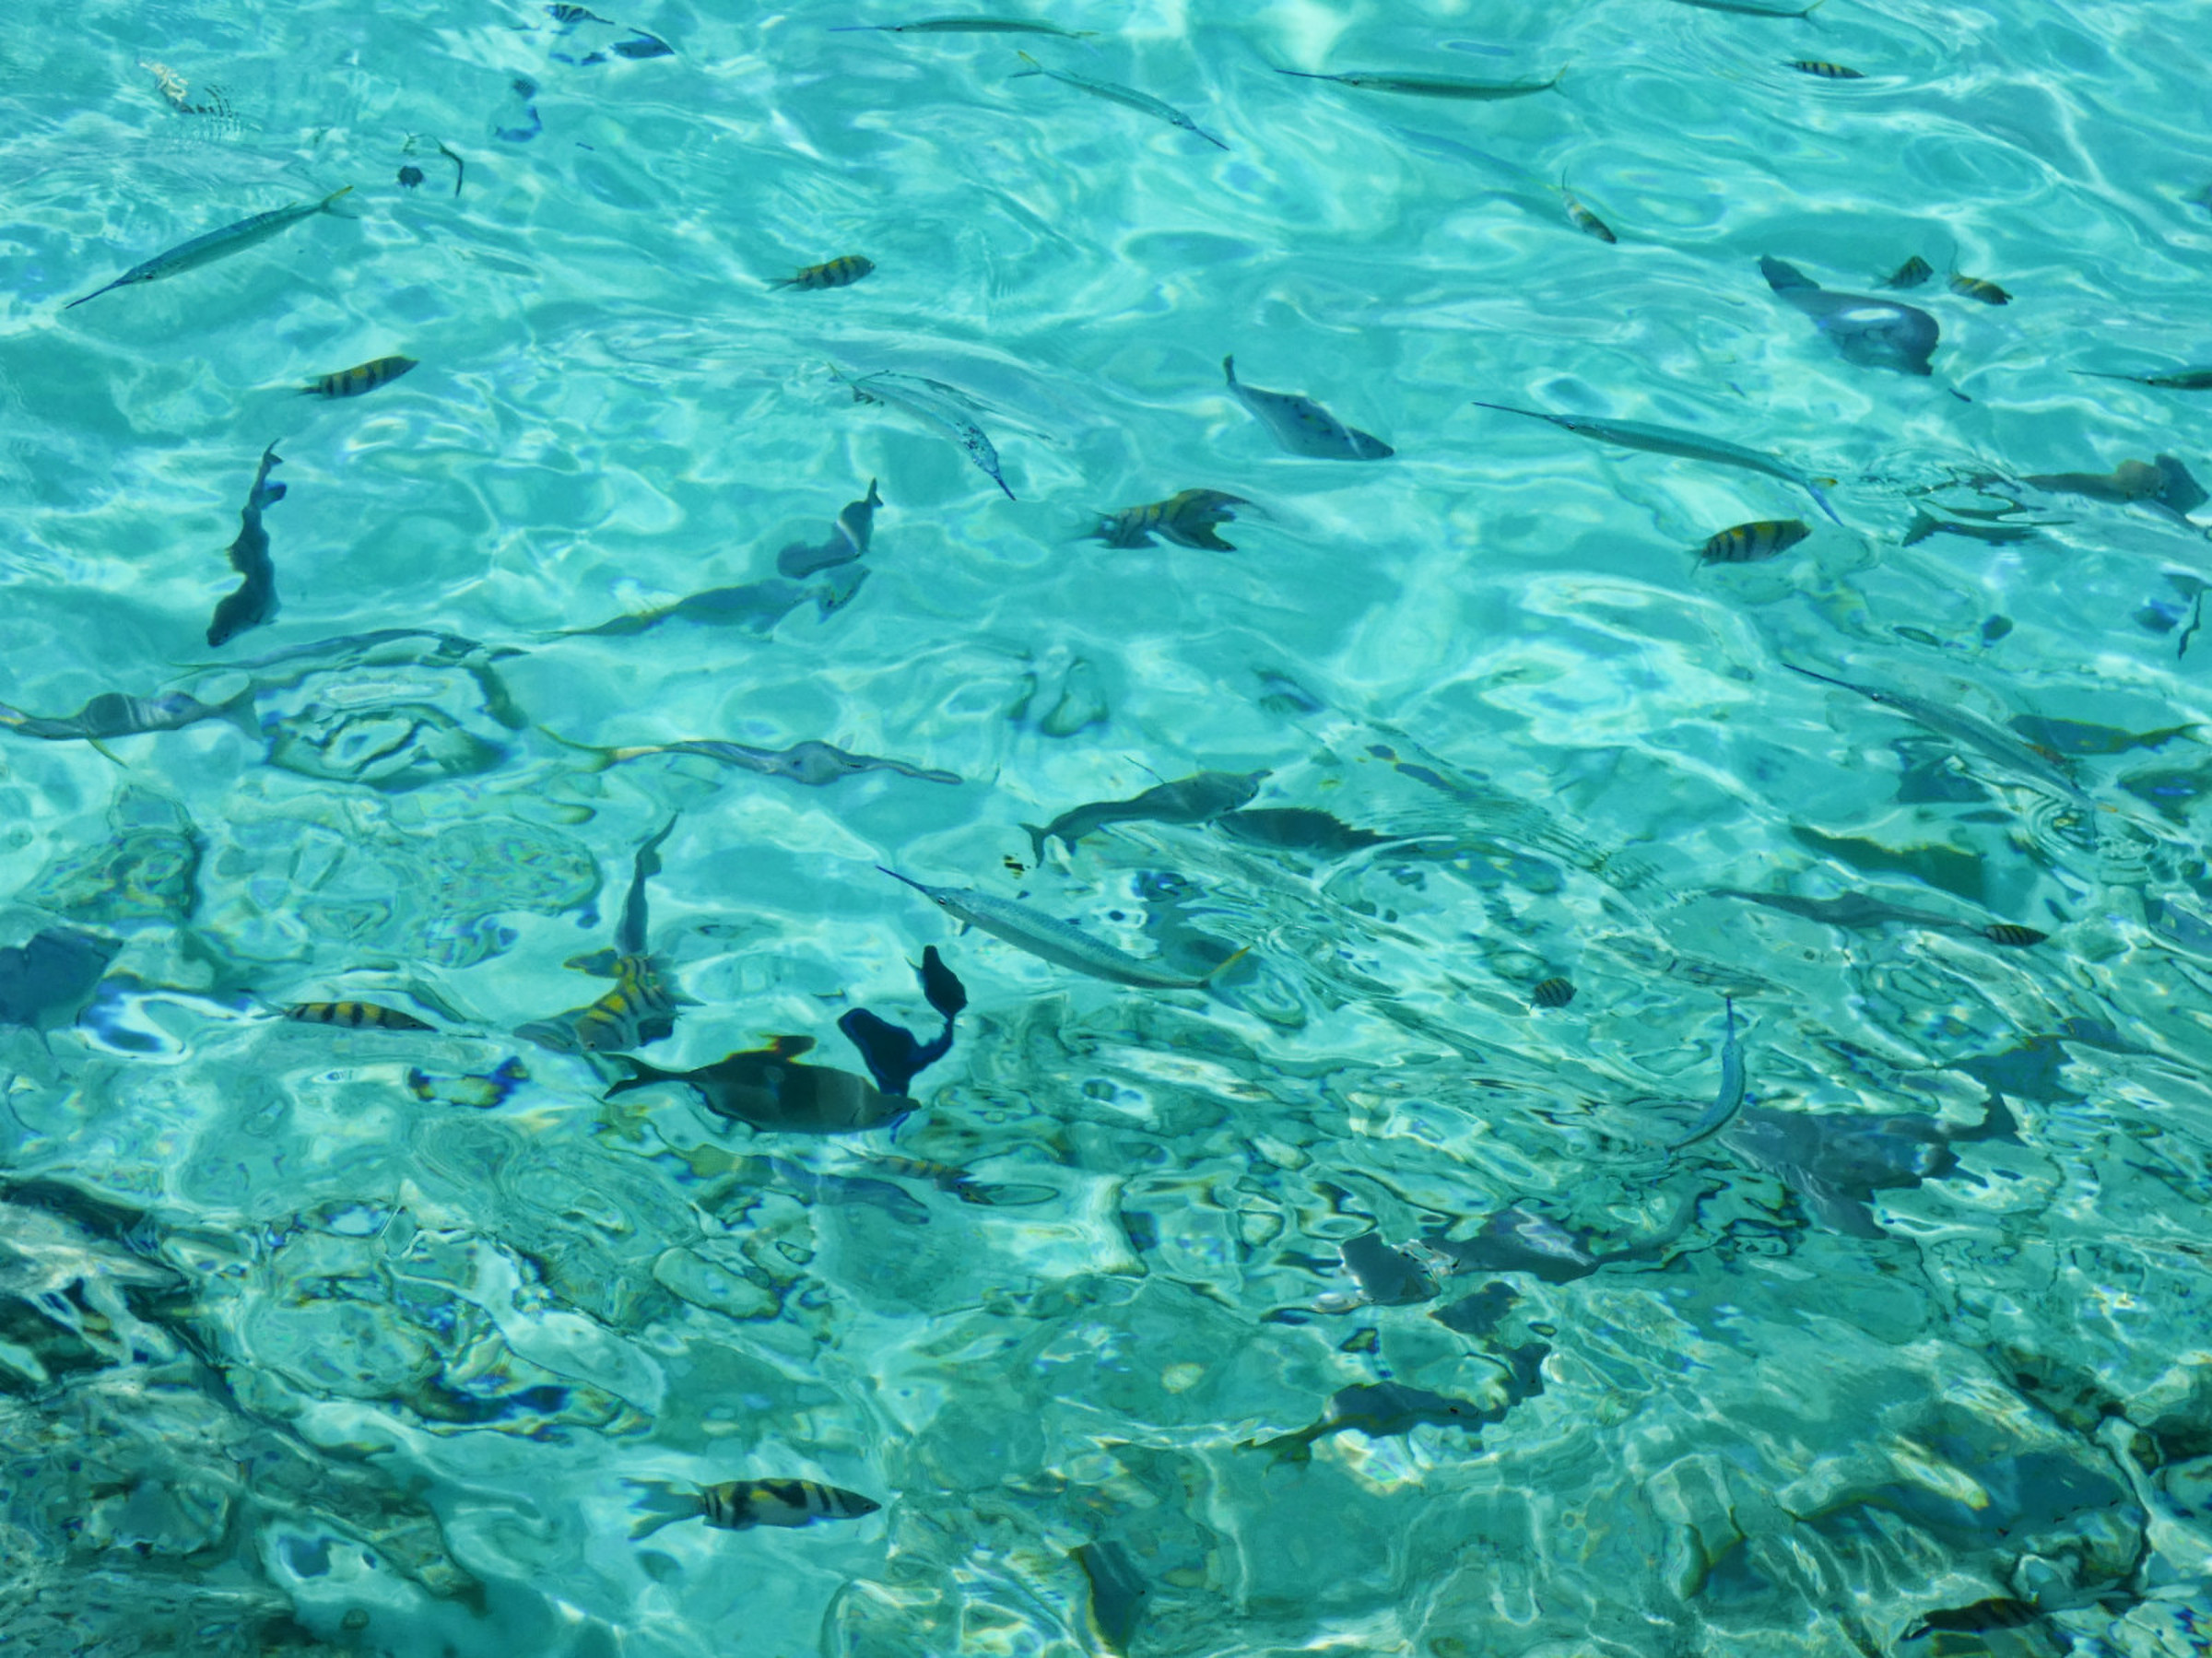 Some small fish swimming near the dock, | Photo